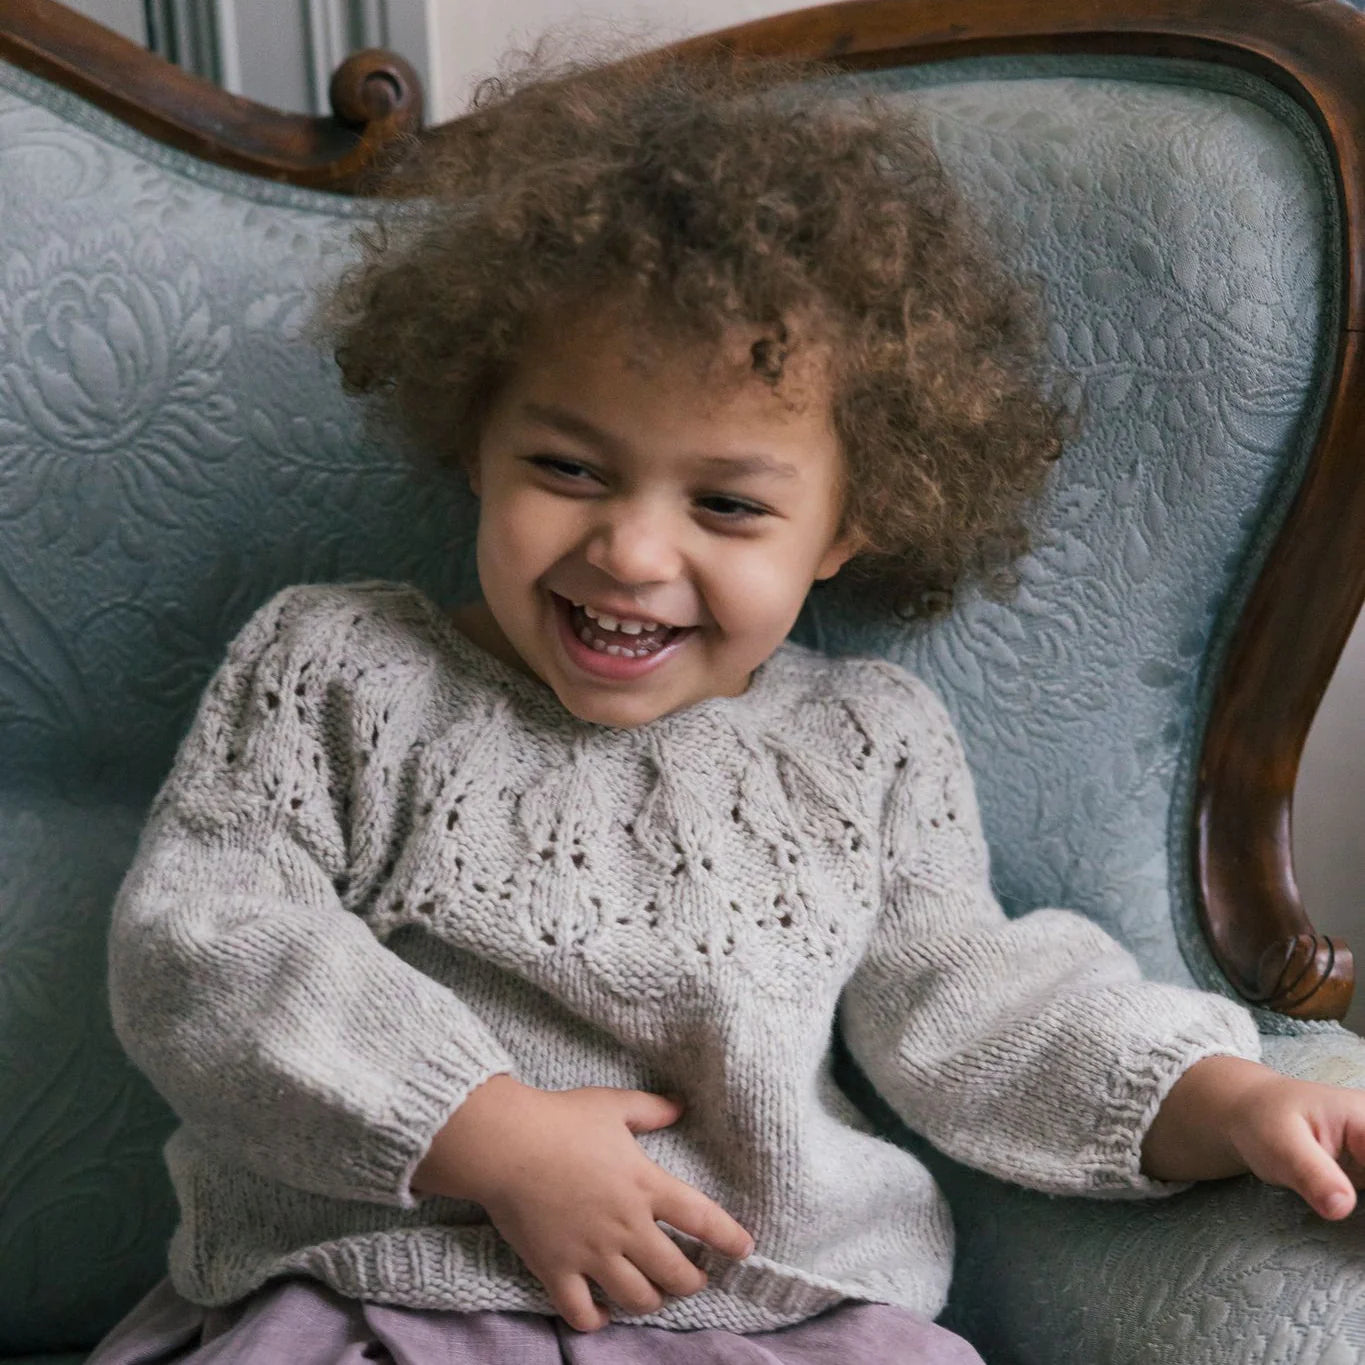 Child laughing while wearing an intricately knit gray sweater